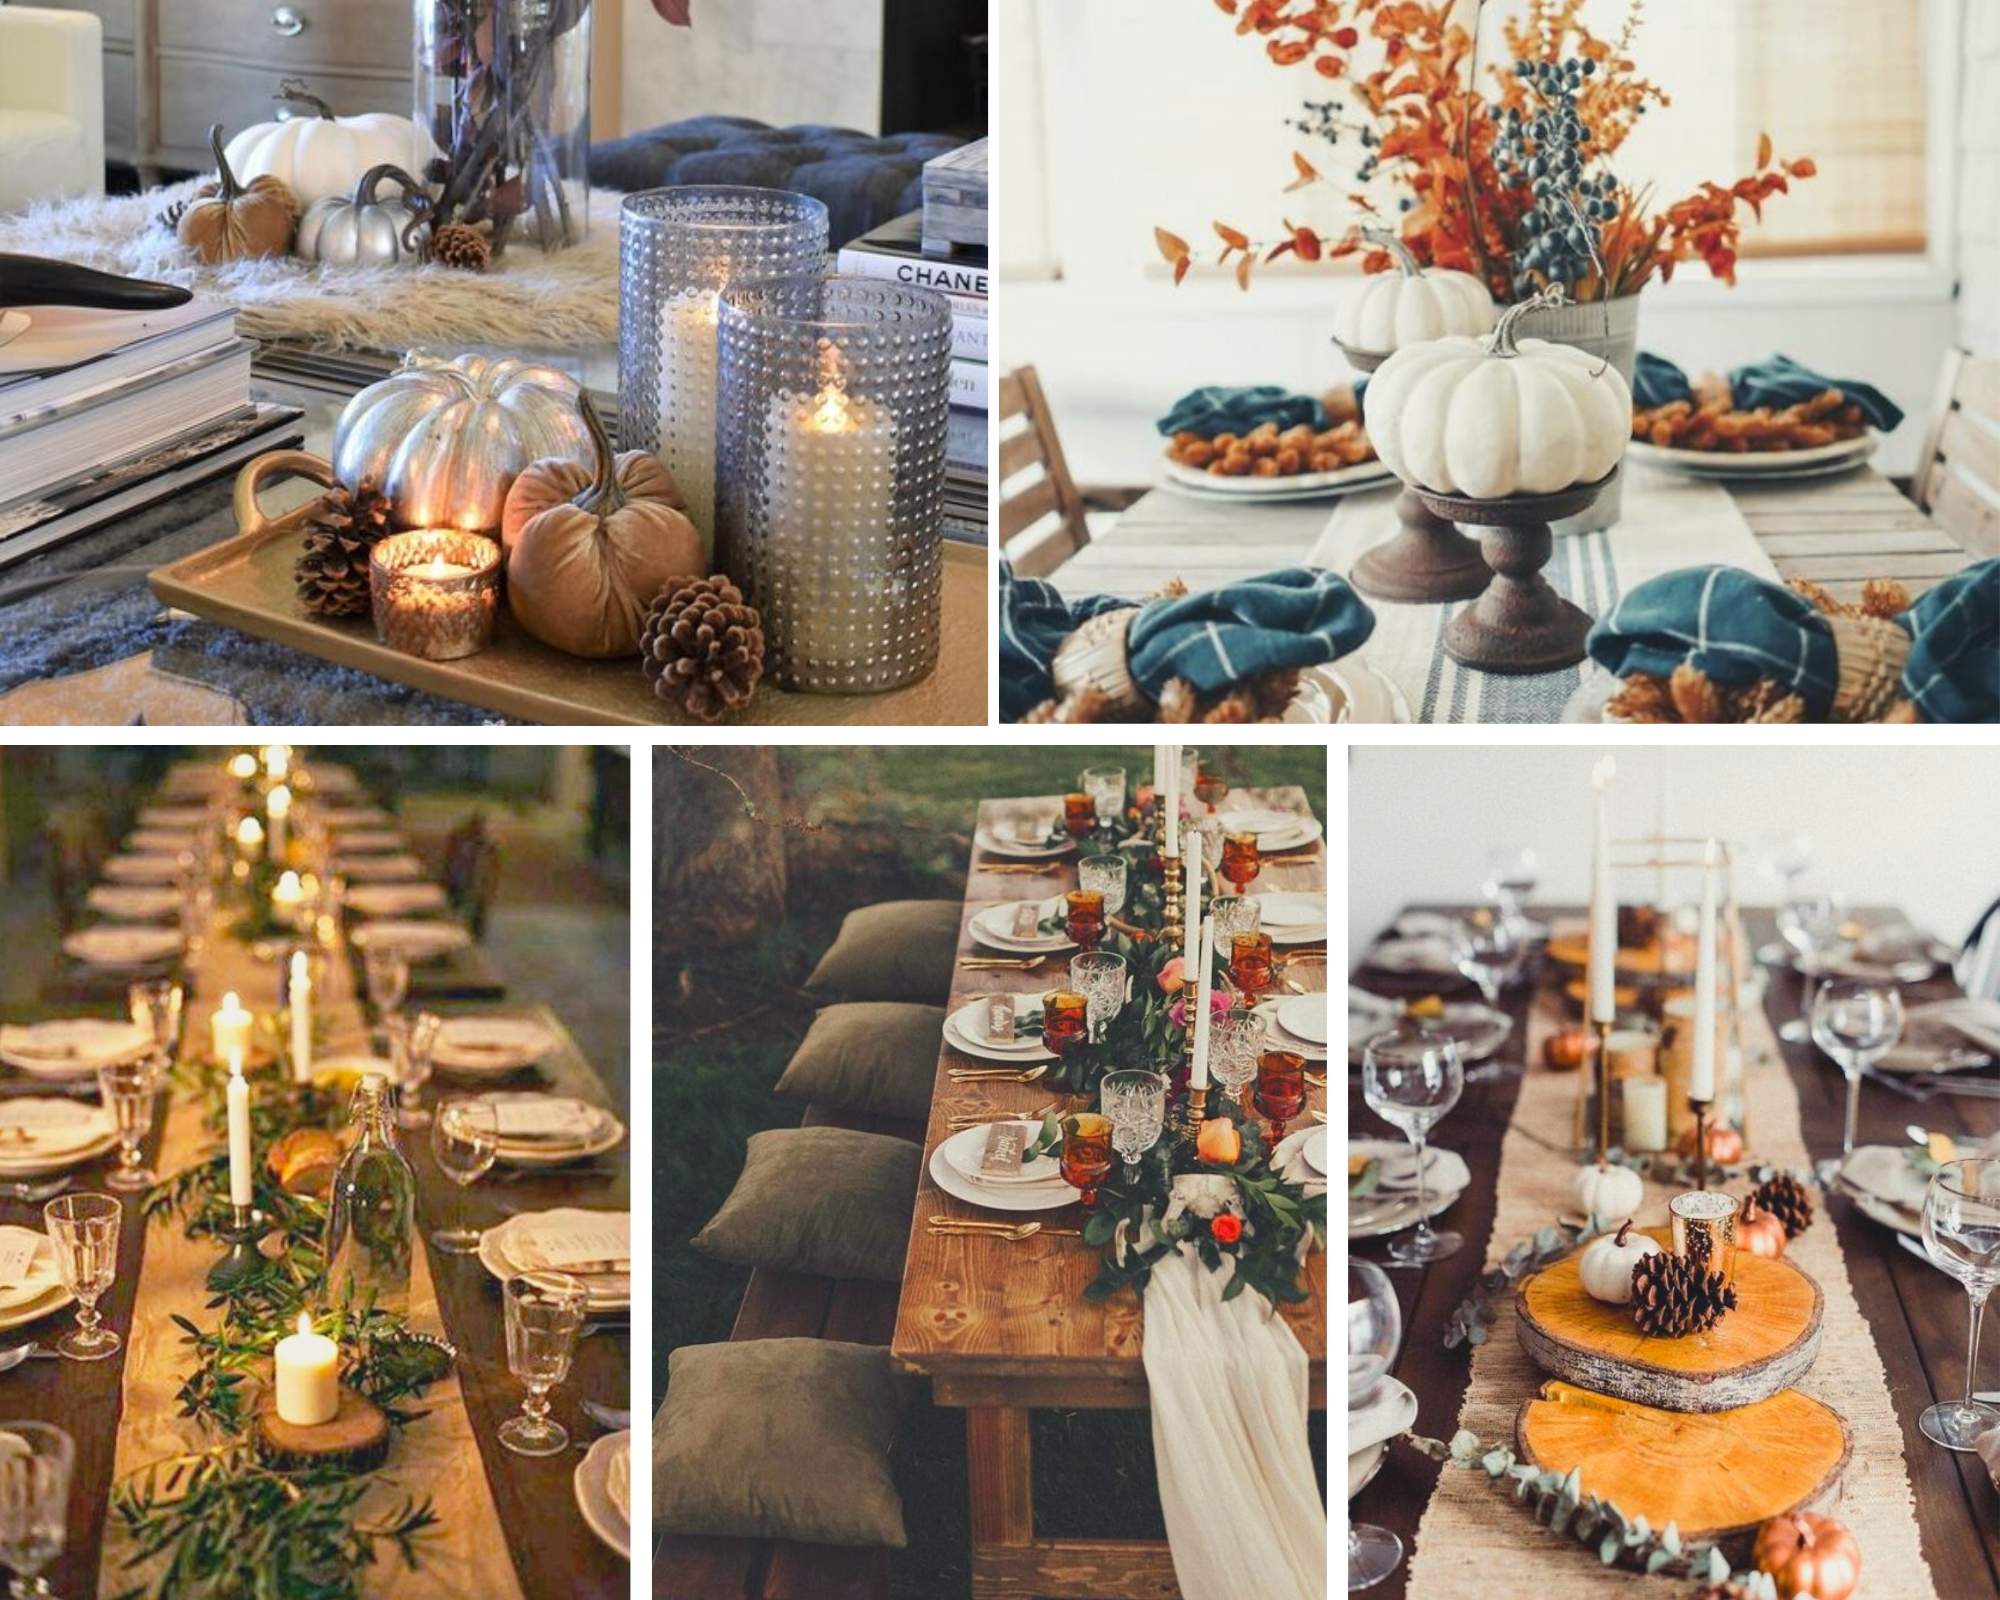 Thanksgiving Decorations: 'Tis the Season to Bring Out That Little Extra Rachel Hulsund Contributor Miami Mom Collective